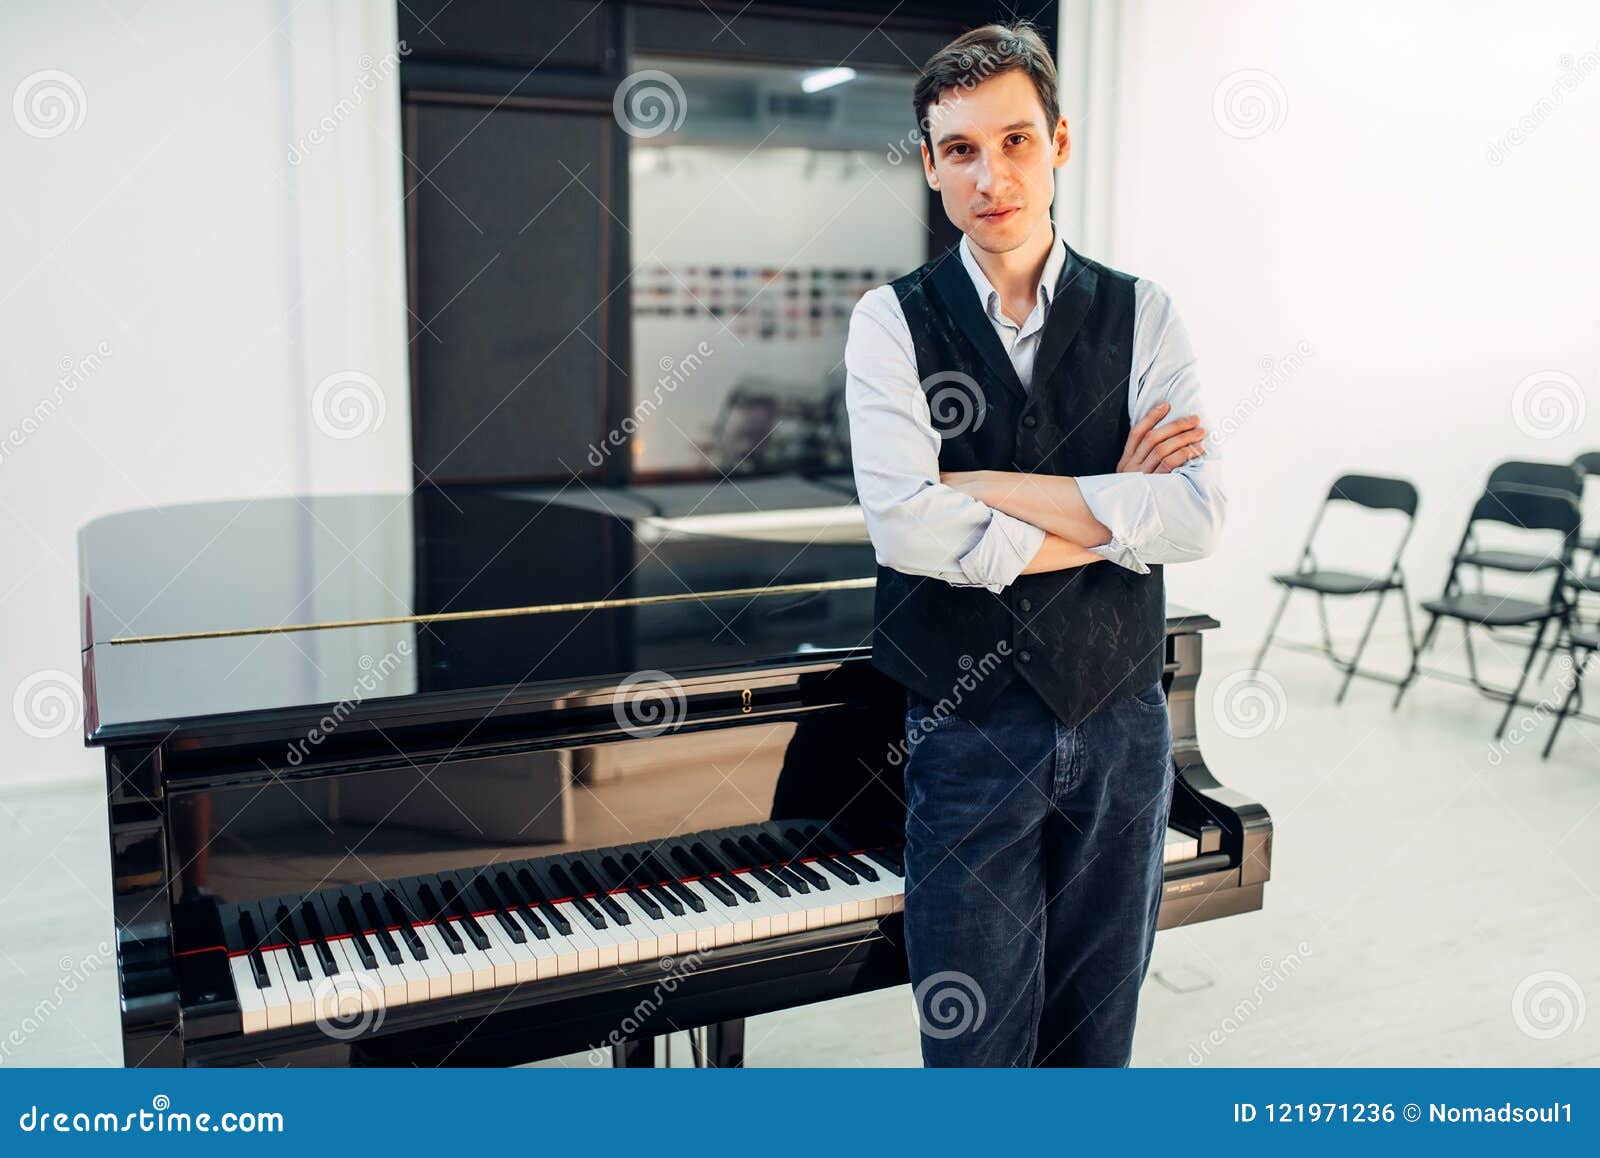 male pianist stands at the black grand piano